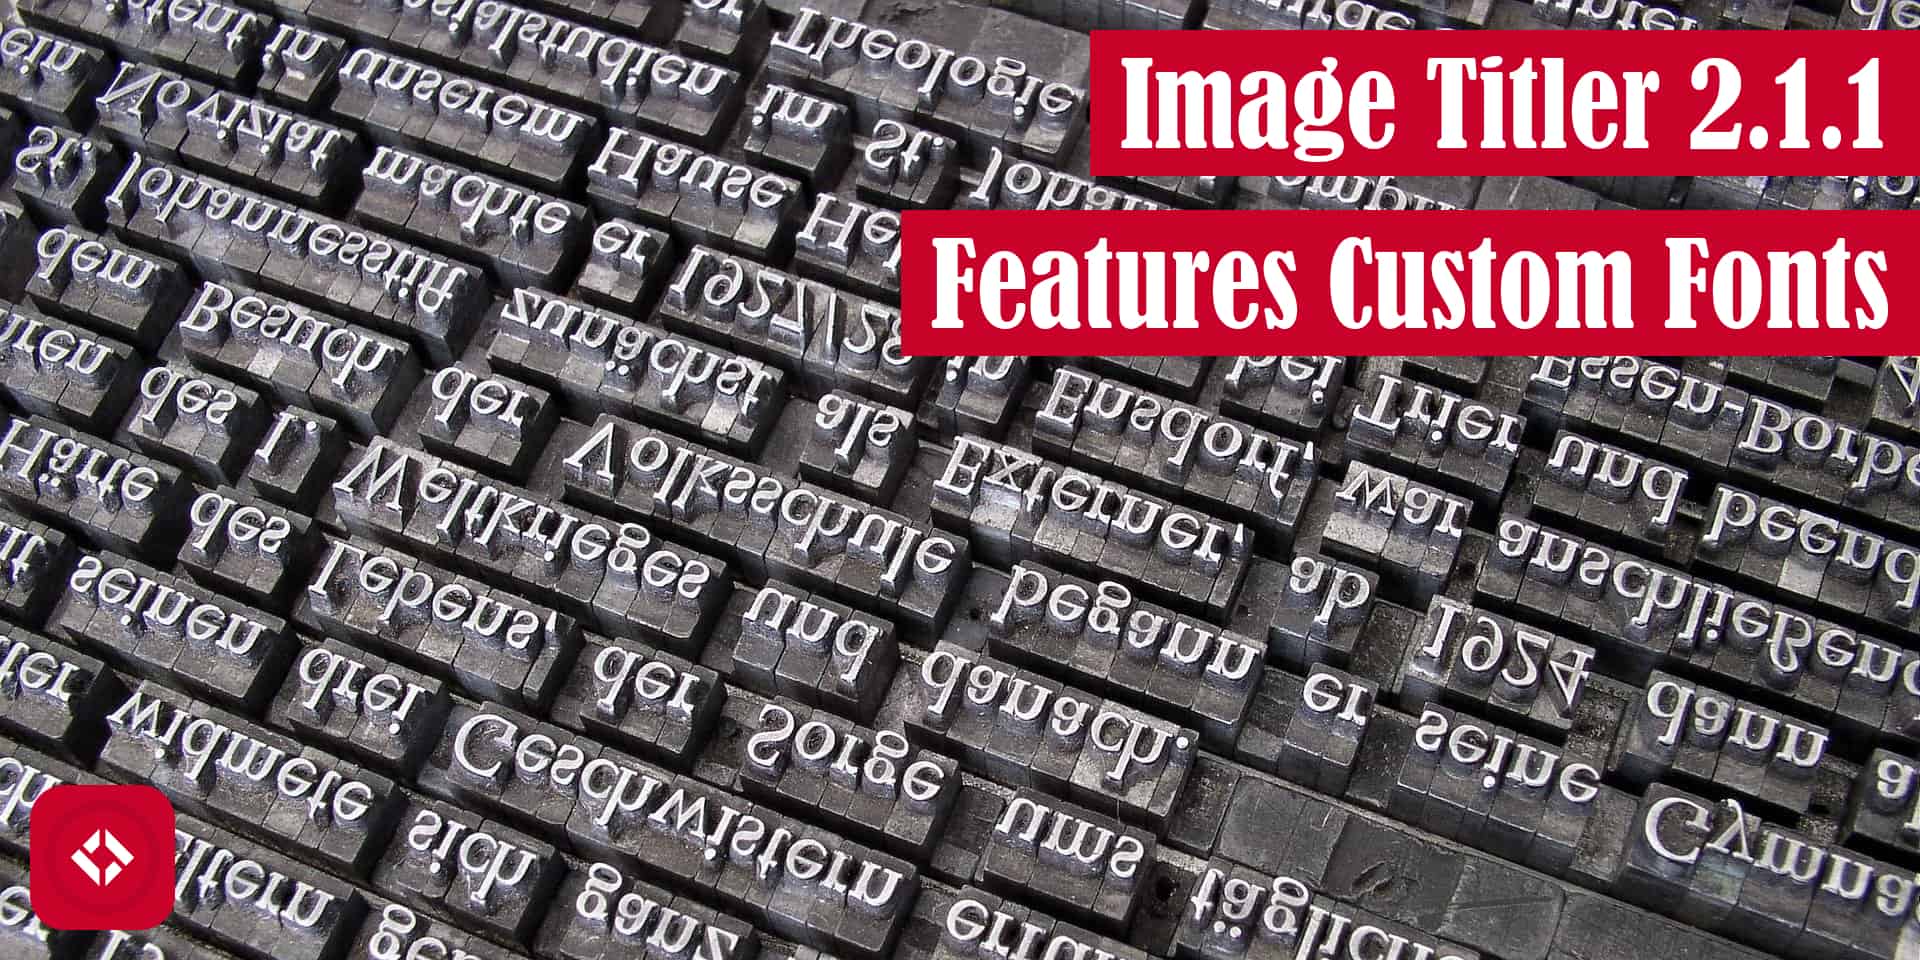 Image Titler 2.1.1 Features Custom Fonts Featured Image